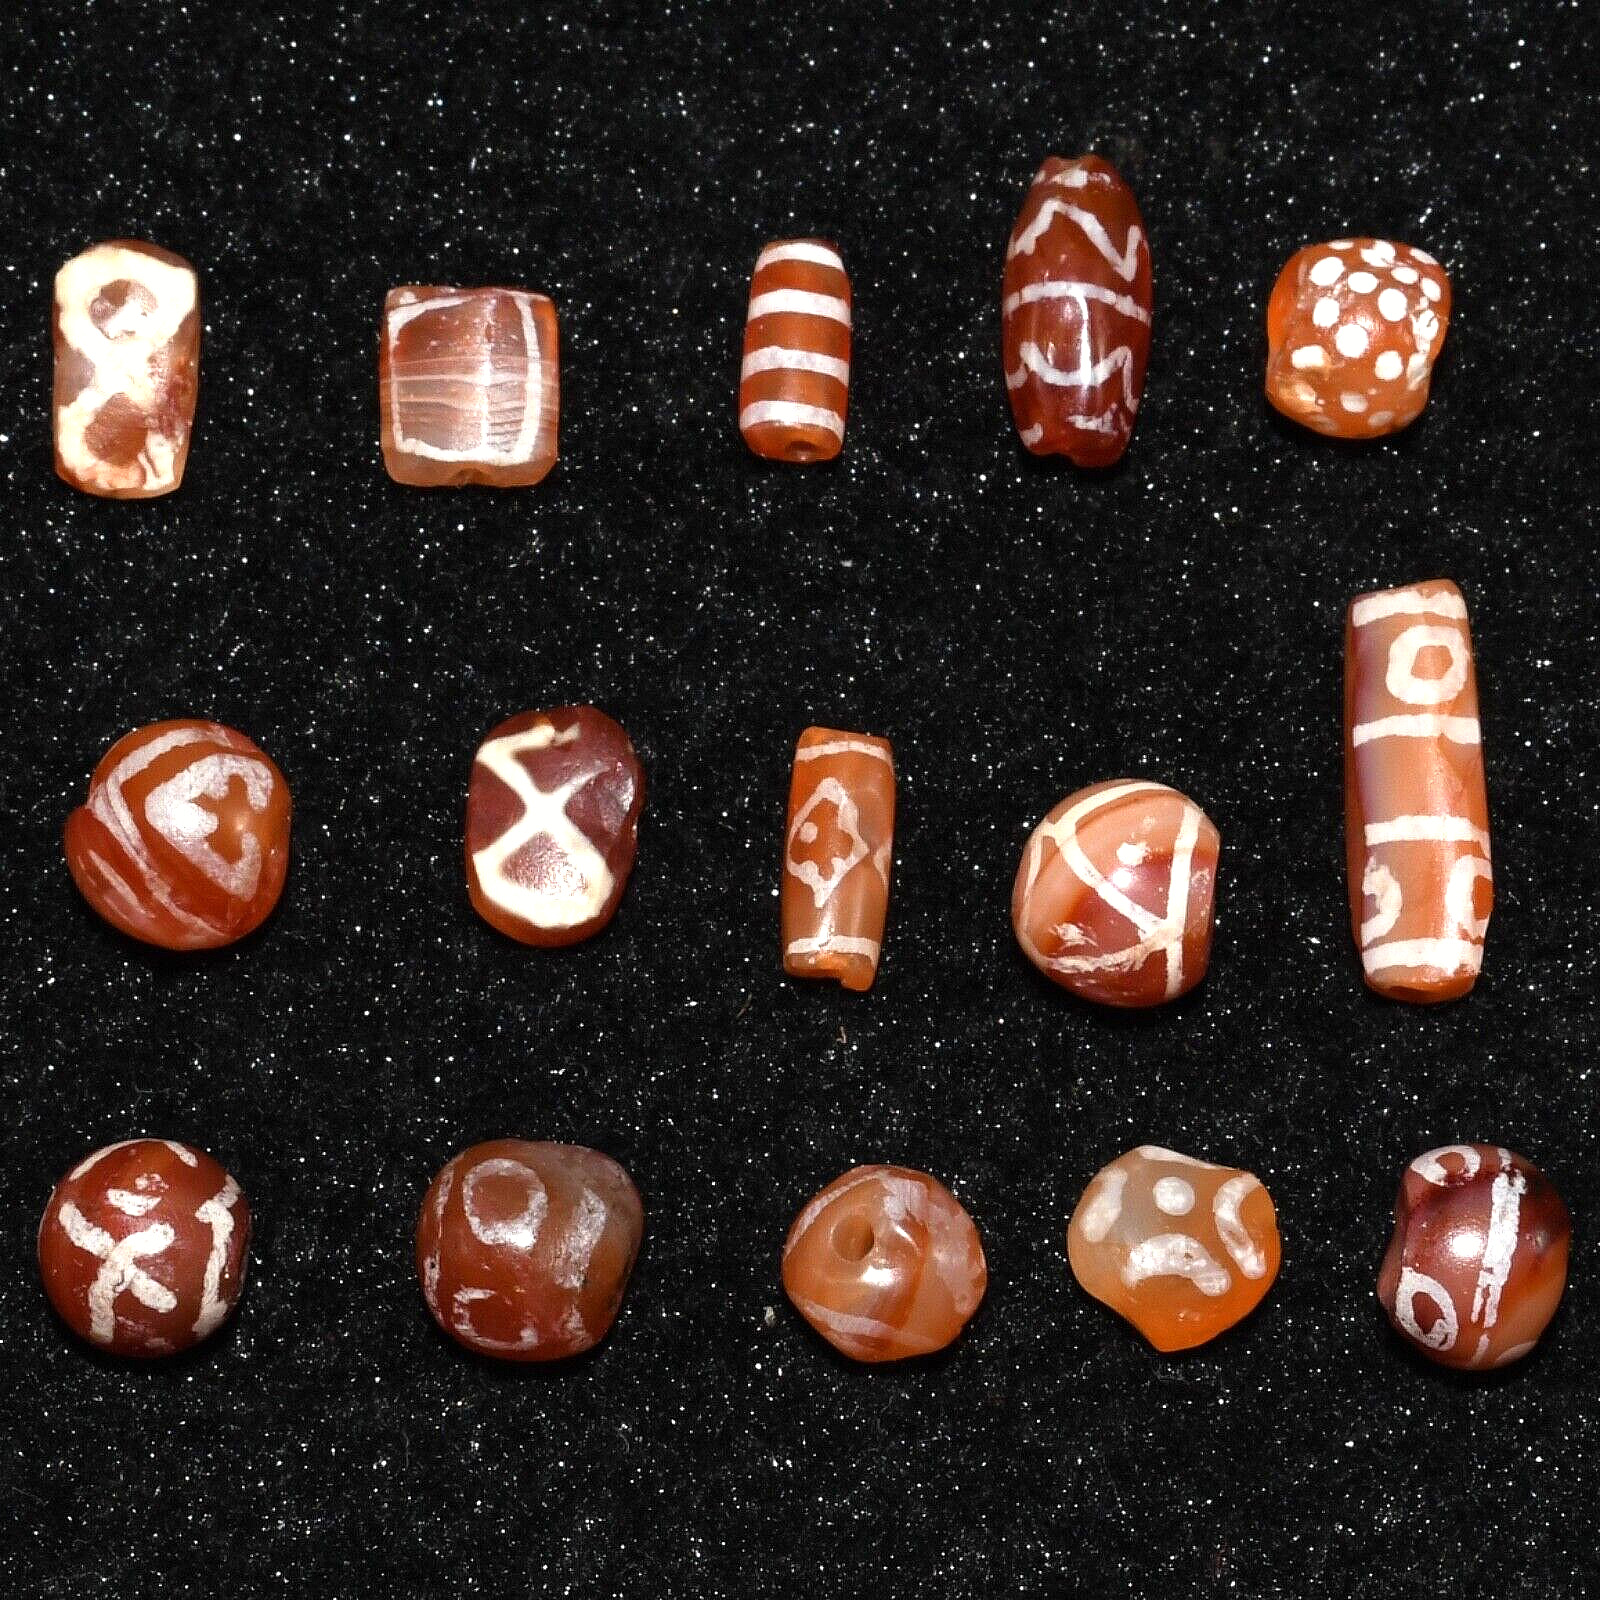 15 Ancient Large Etched Carnelian Longevity Stone Beads in very Good Condition